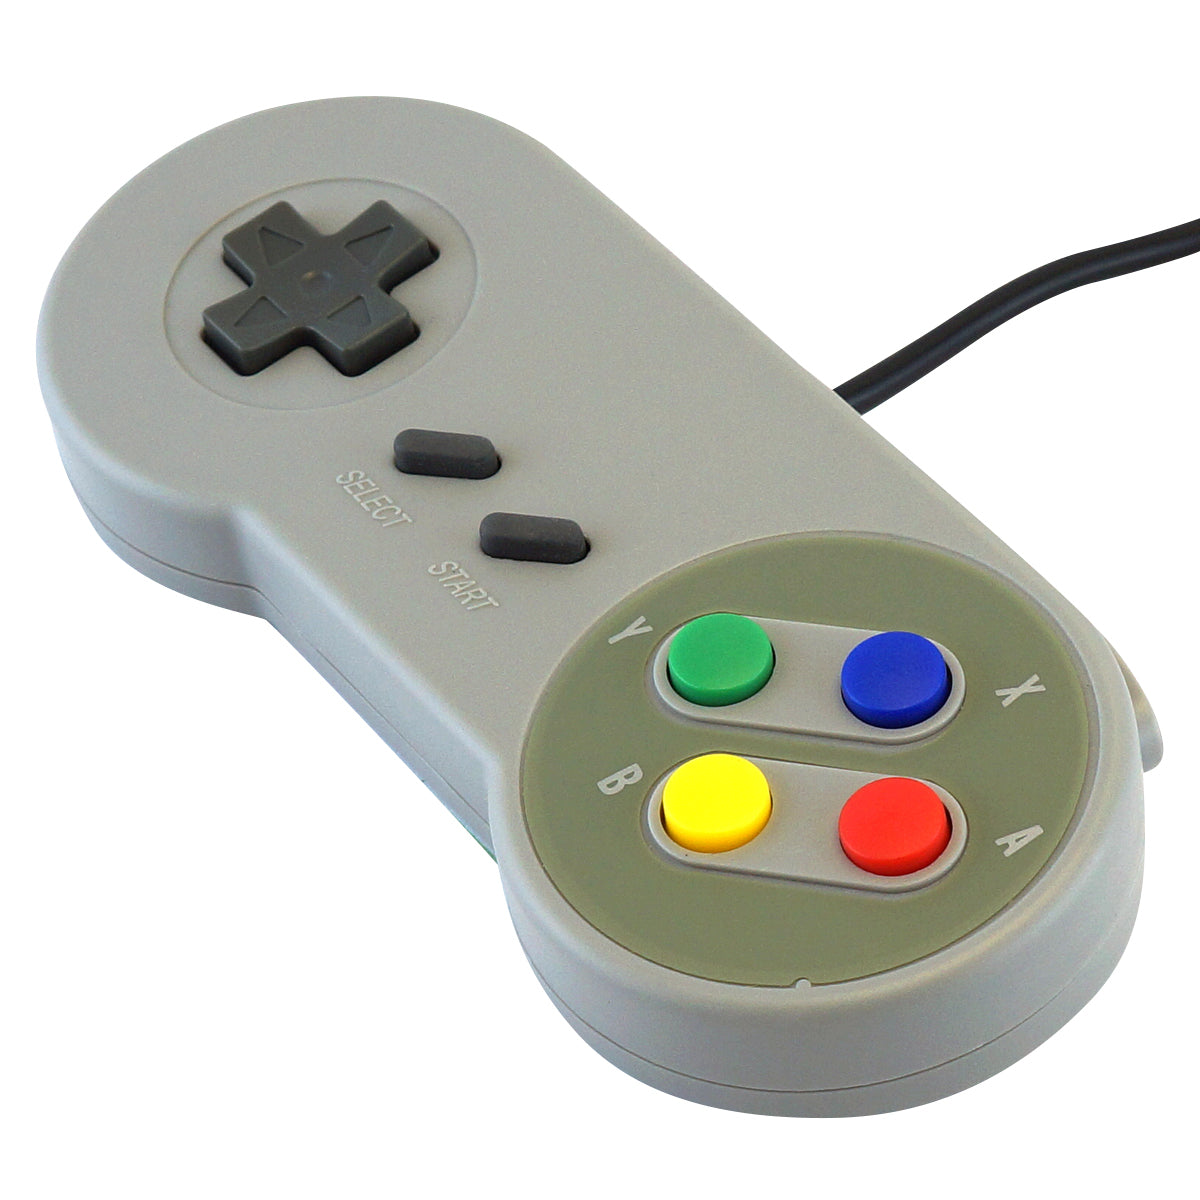 are there any snes usb controller for windows 10 ?